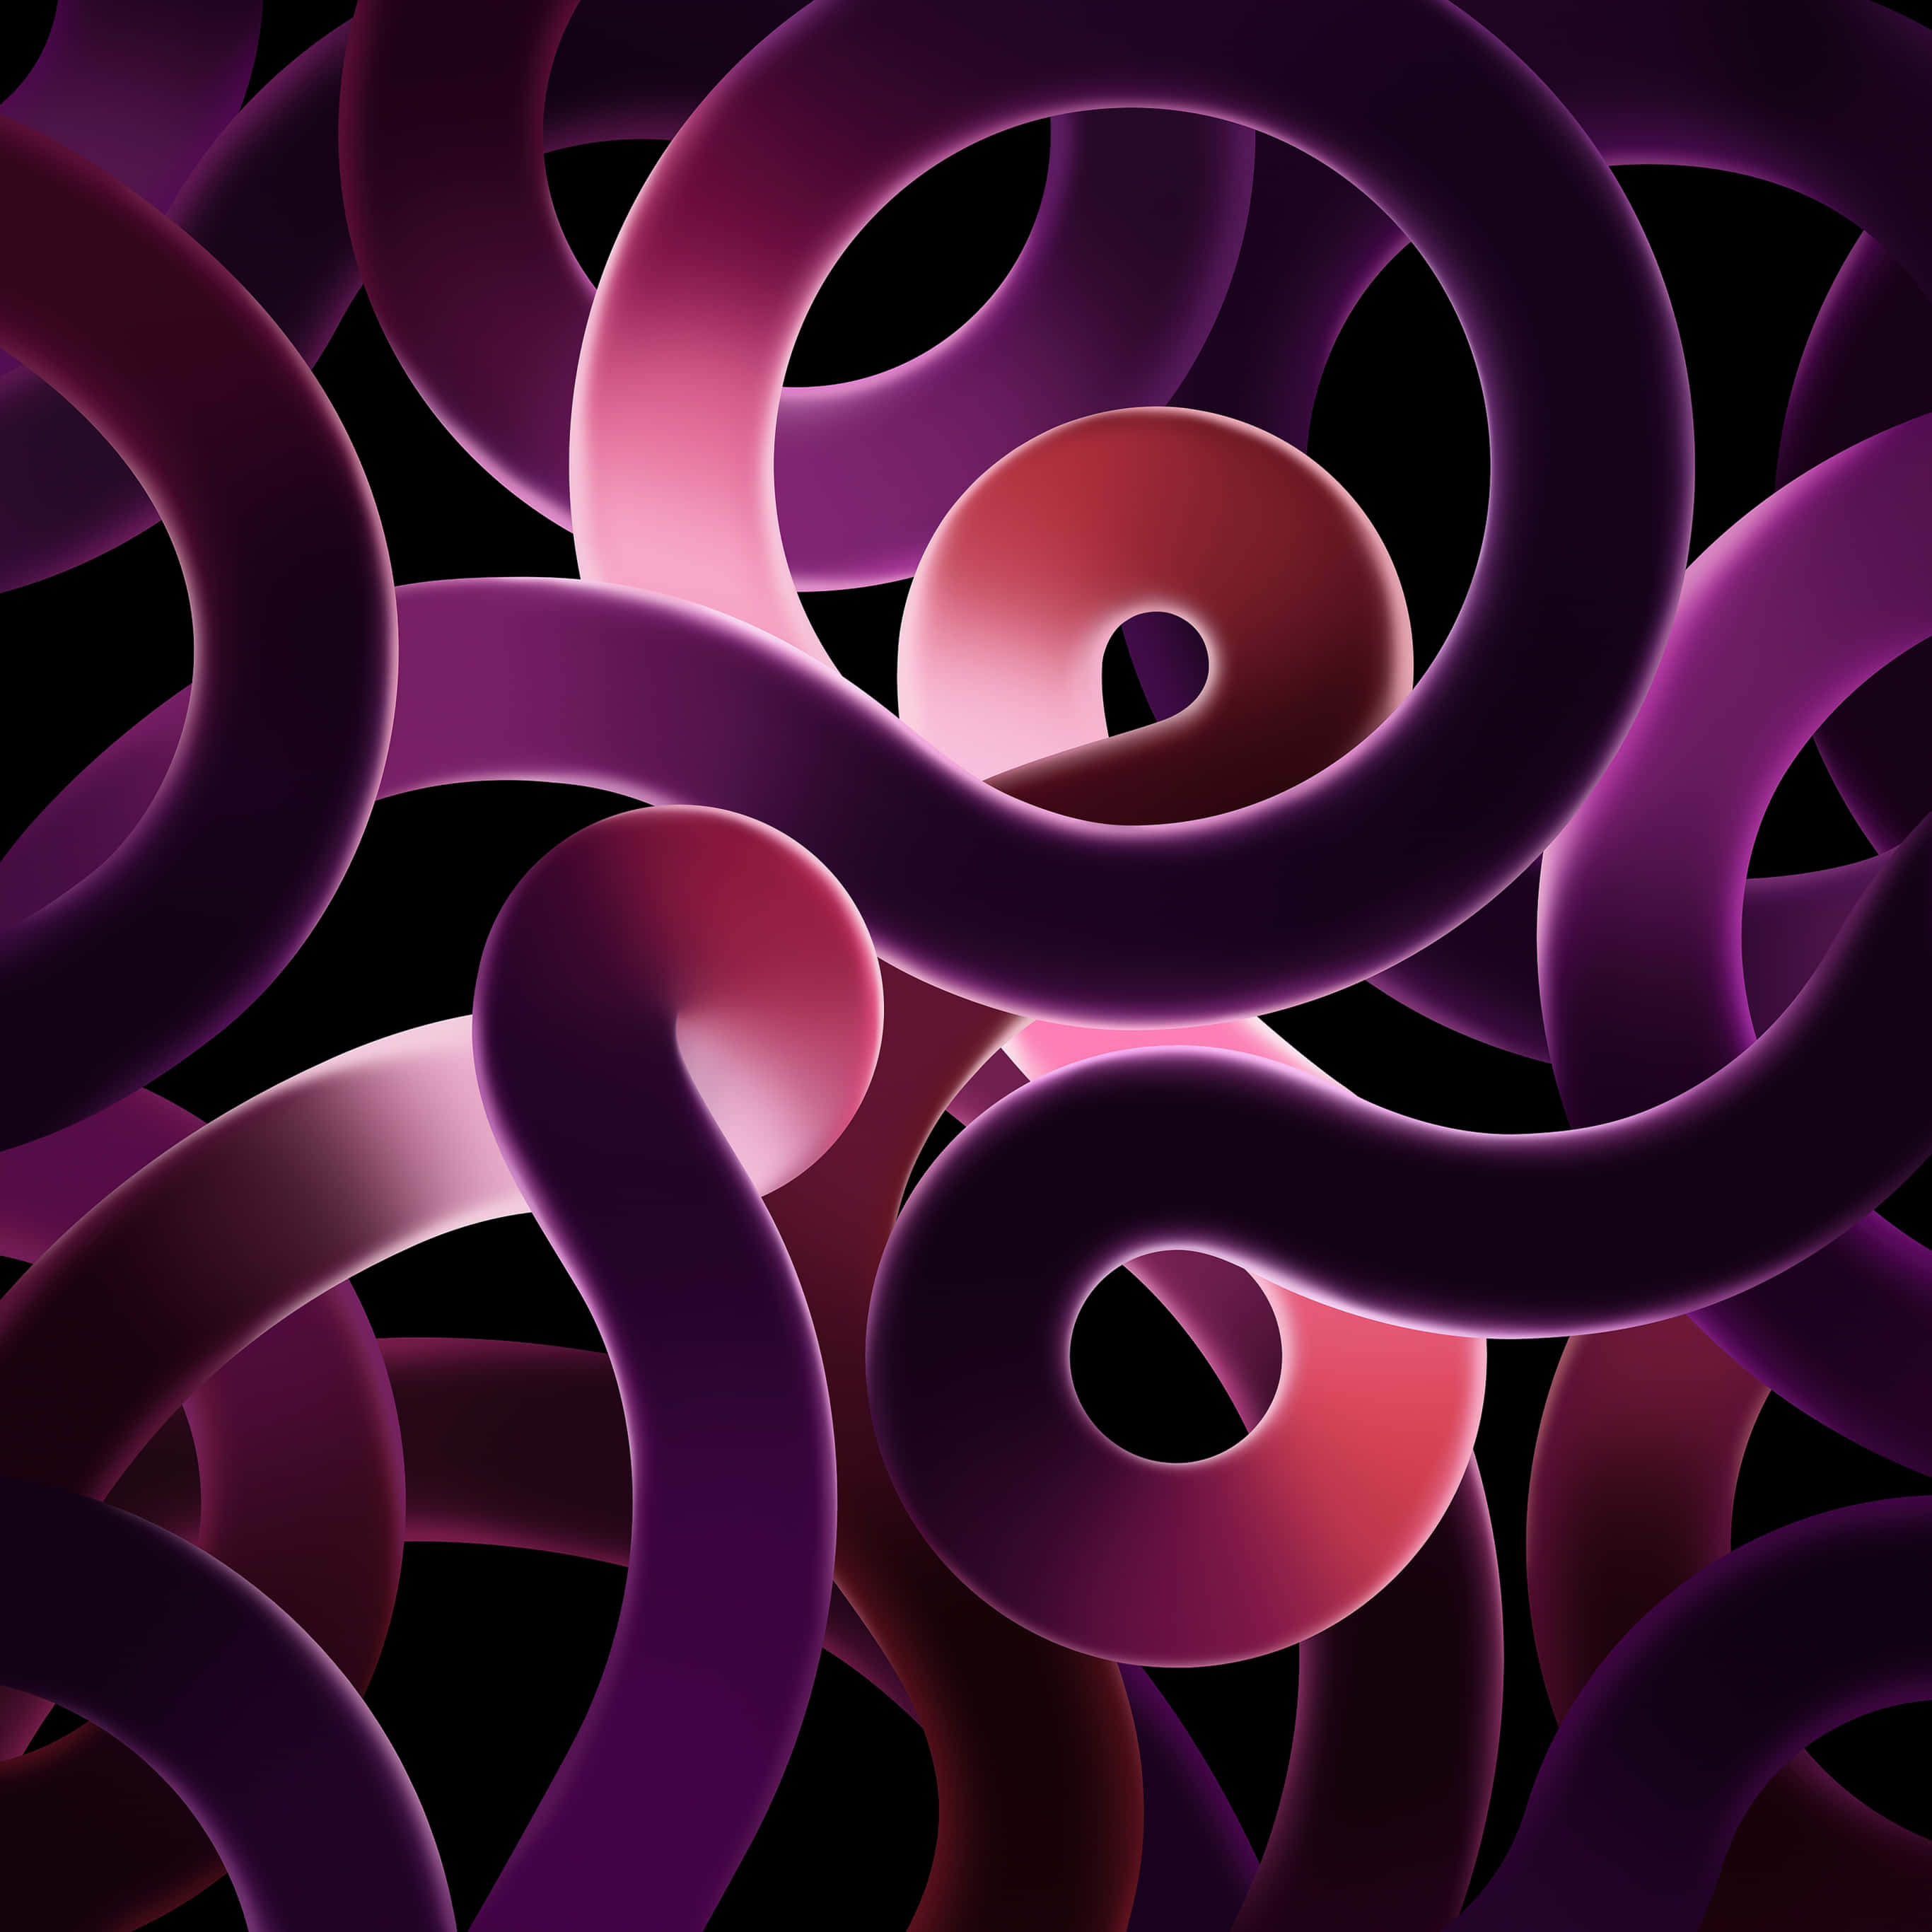 A Purple And Red Spiral Pattern On A Black Background Wallpaper